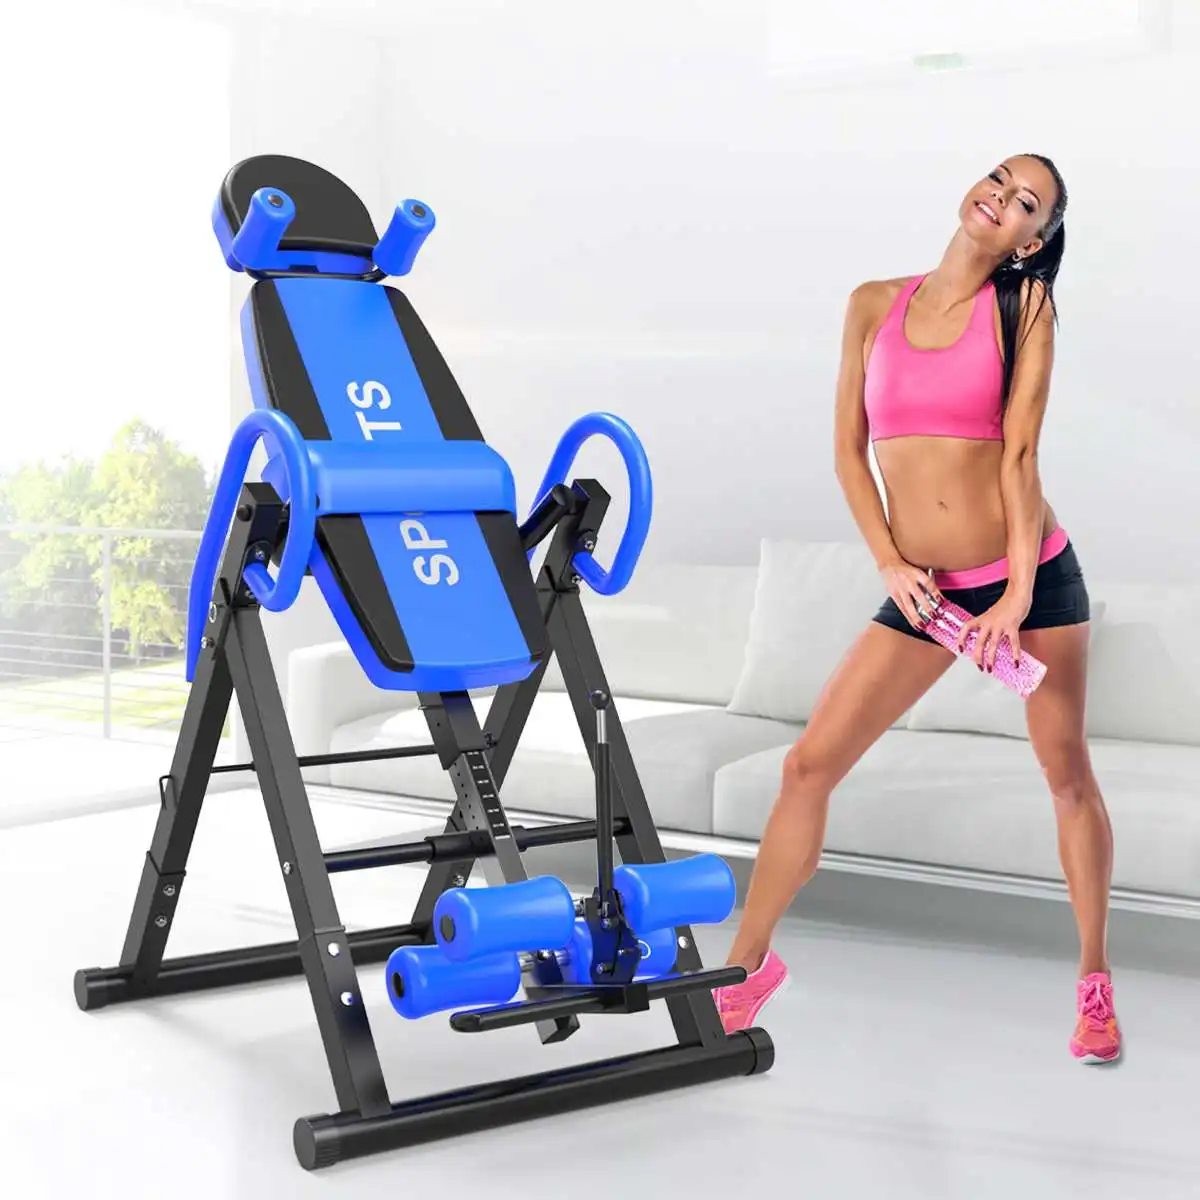 Permalink to Inversion Table Fitness Chiropractic Back Stretcher Safety Reflexology Pain Relief Home Gym Training Foldable Upside Down Device